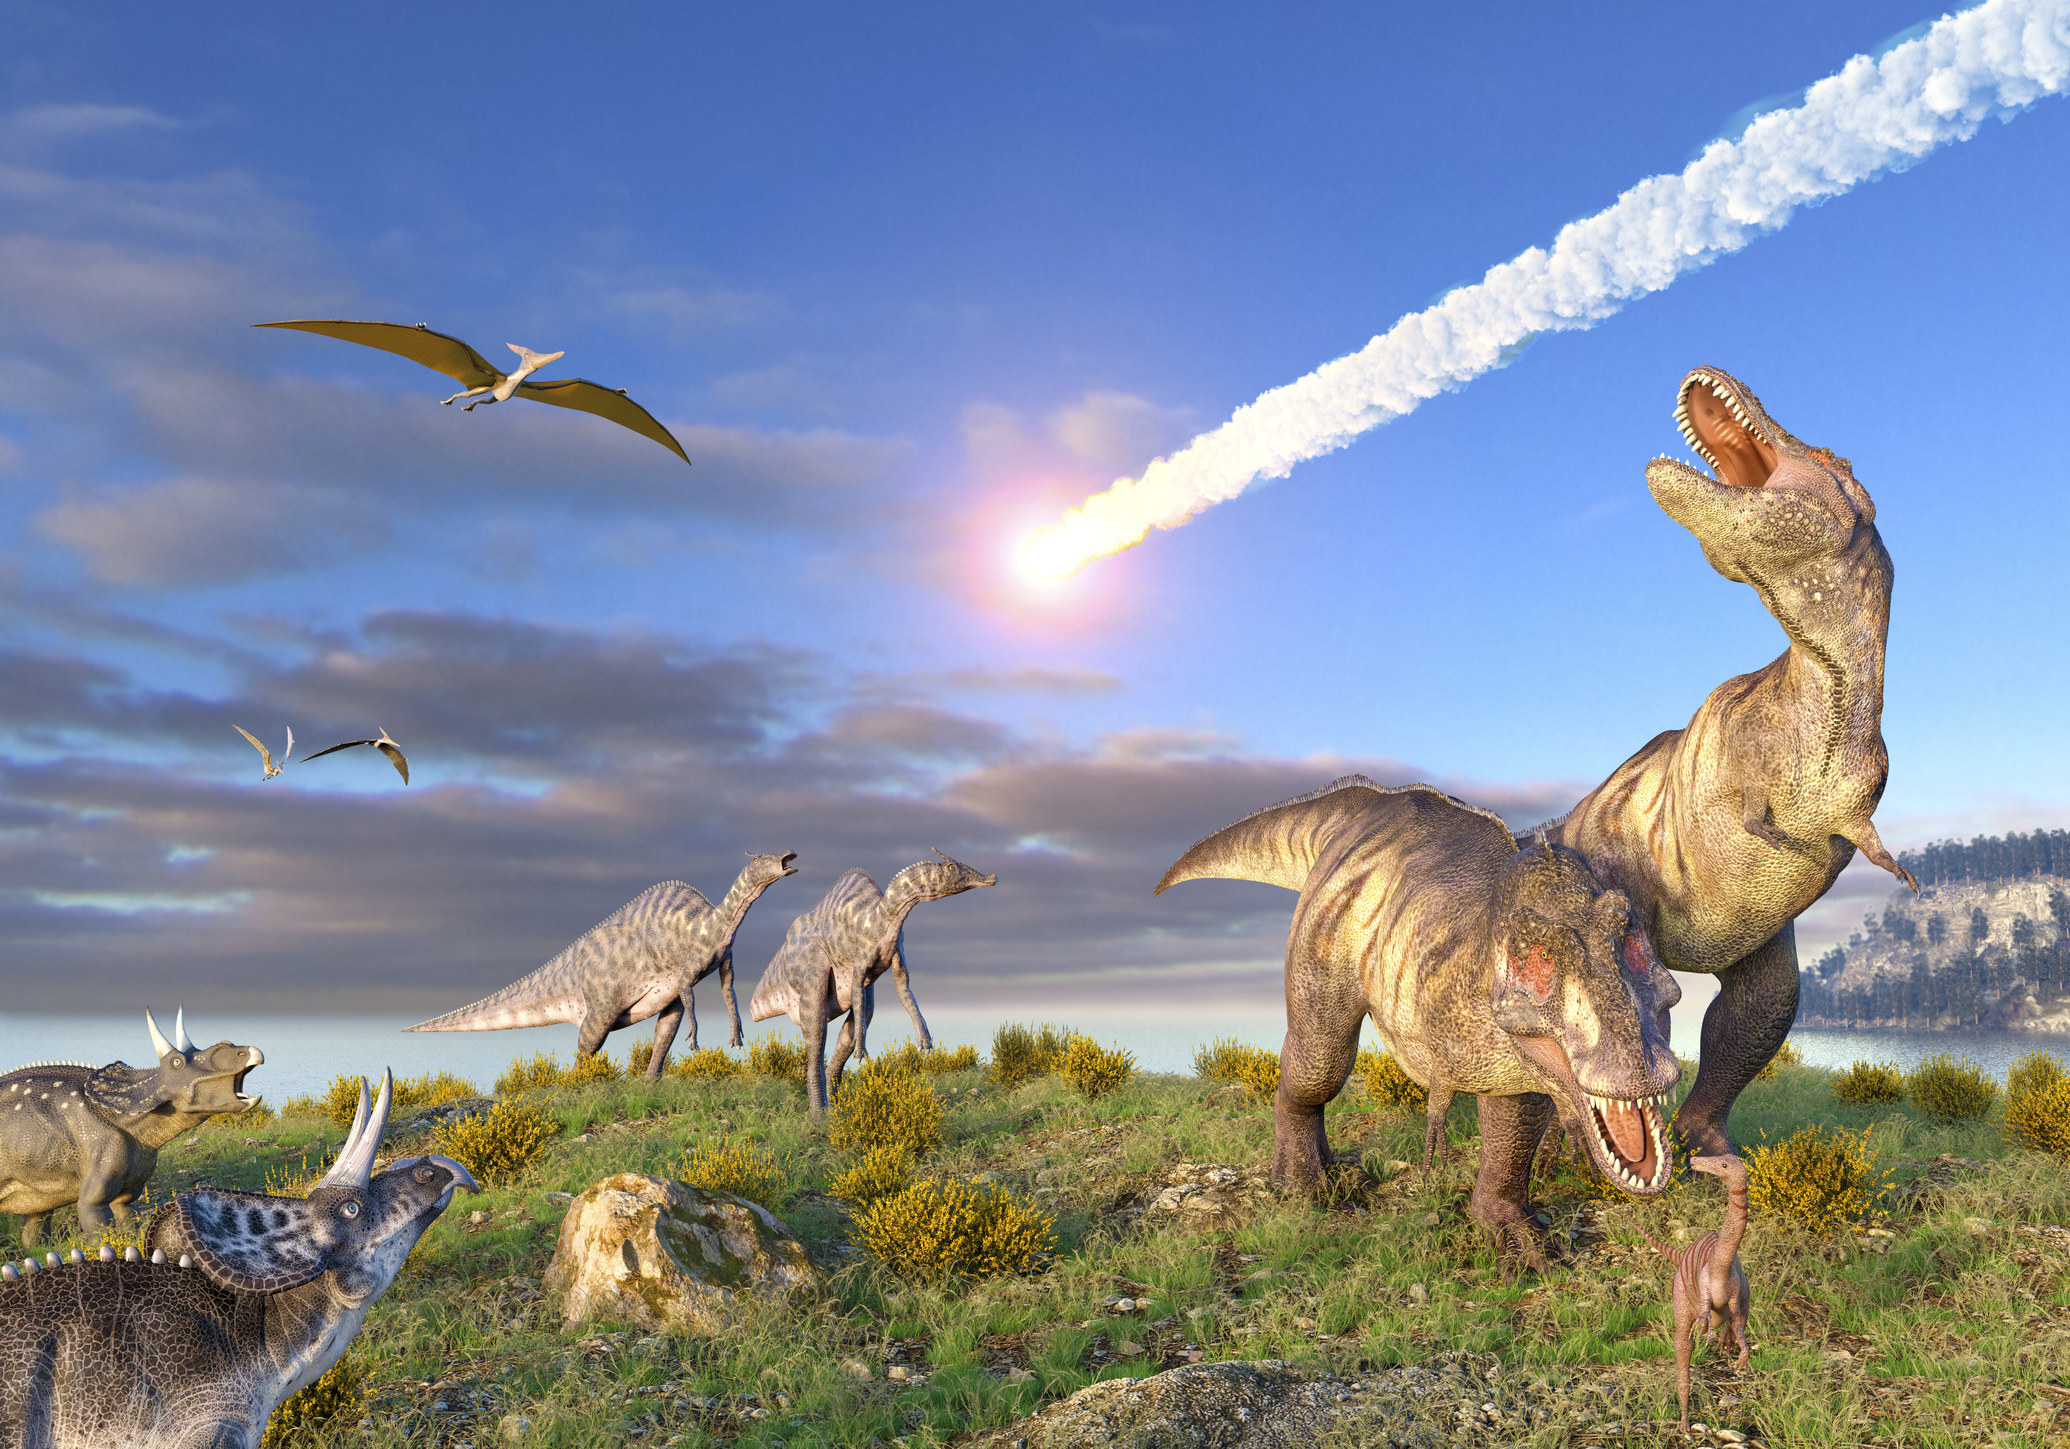 An imagine of the asteroid flying out of the sky about to kill the dinosaurs